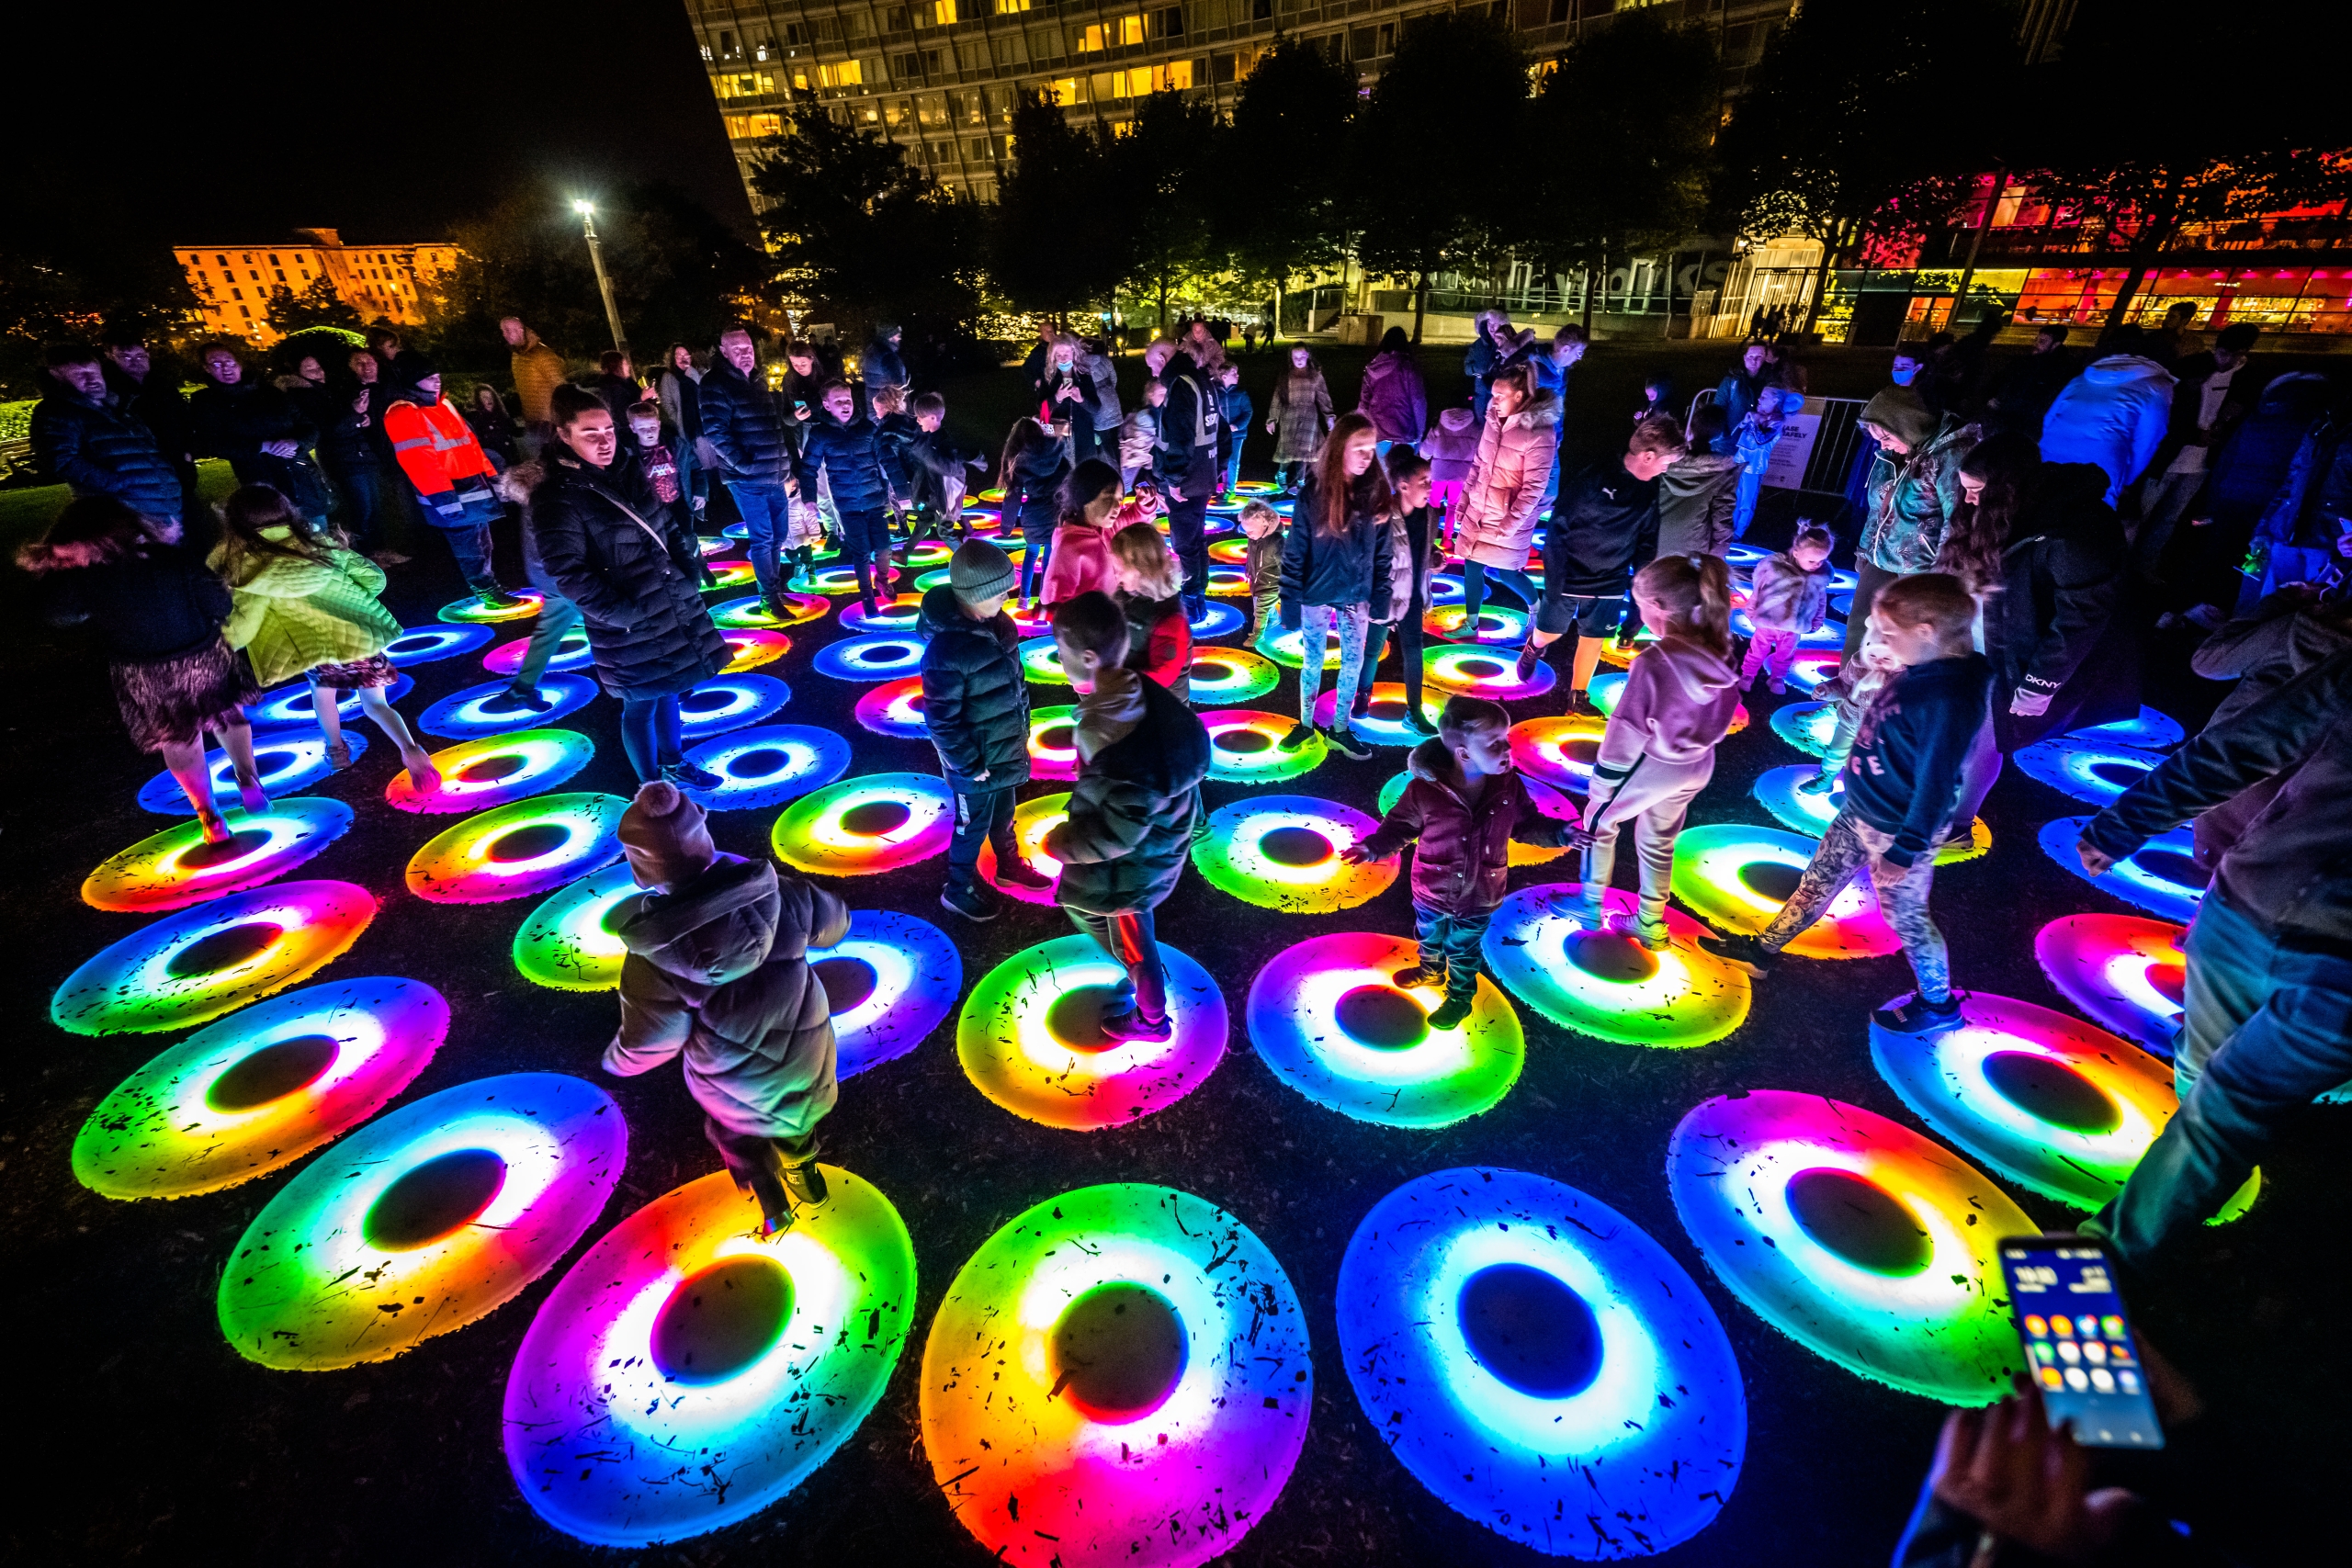 the pool light installation numerous coloured circles with people jumping on them